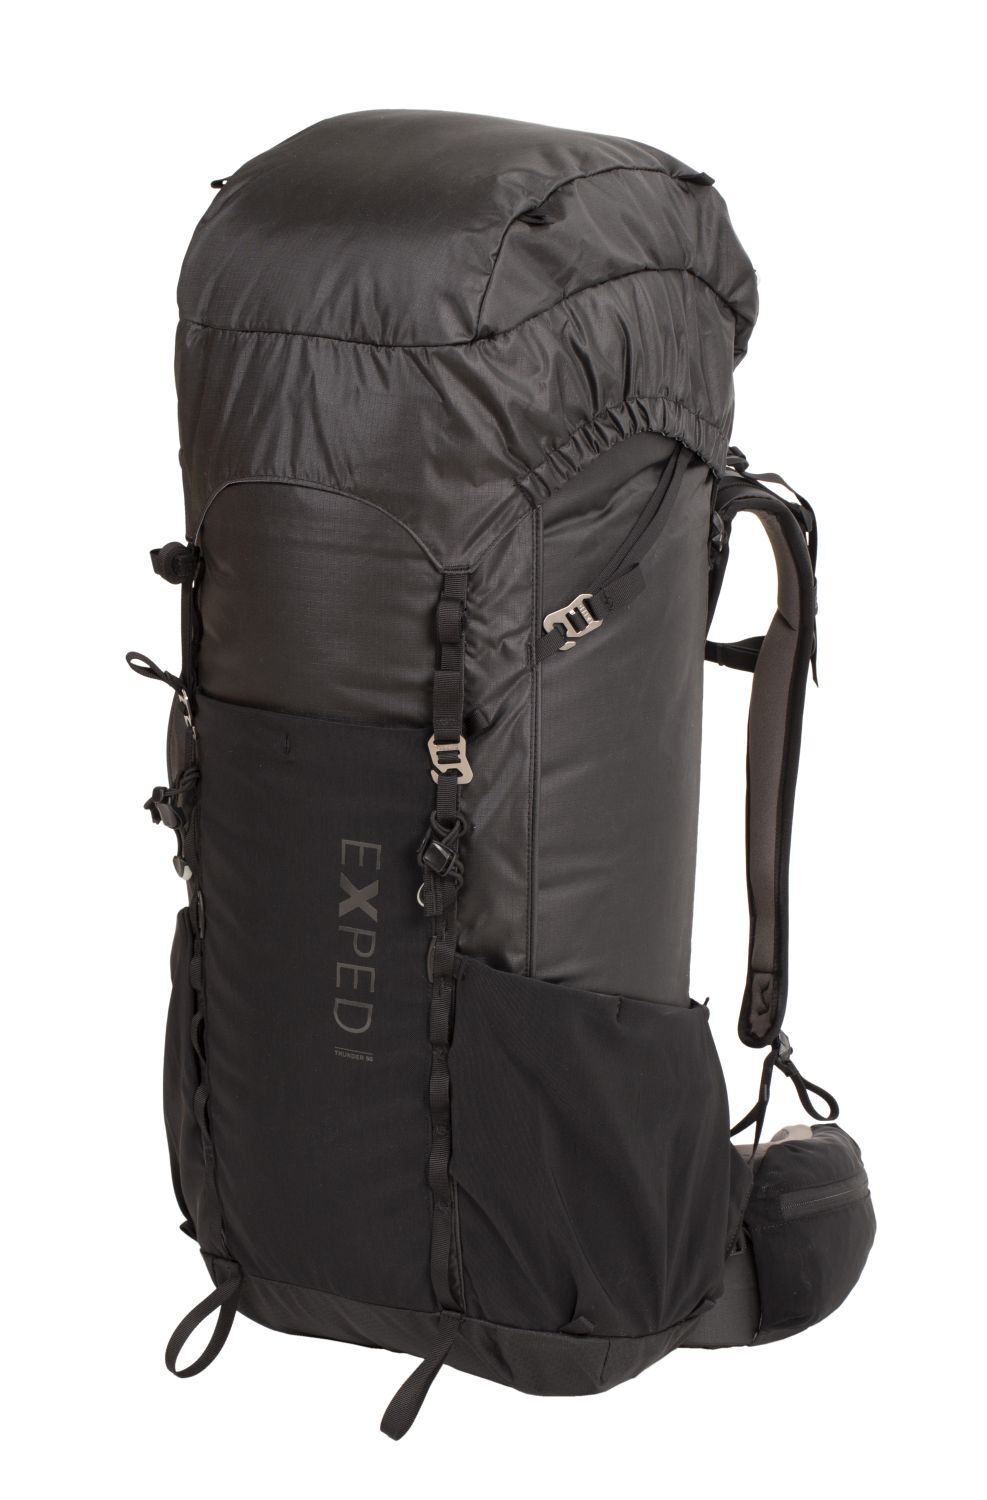 EXPED Thunder 50 online bobleisure